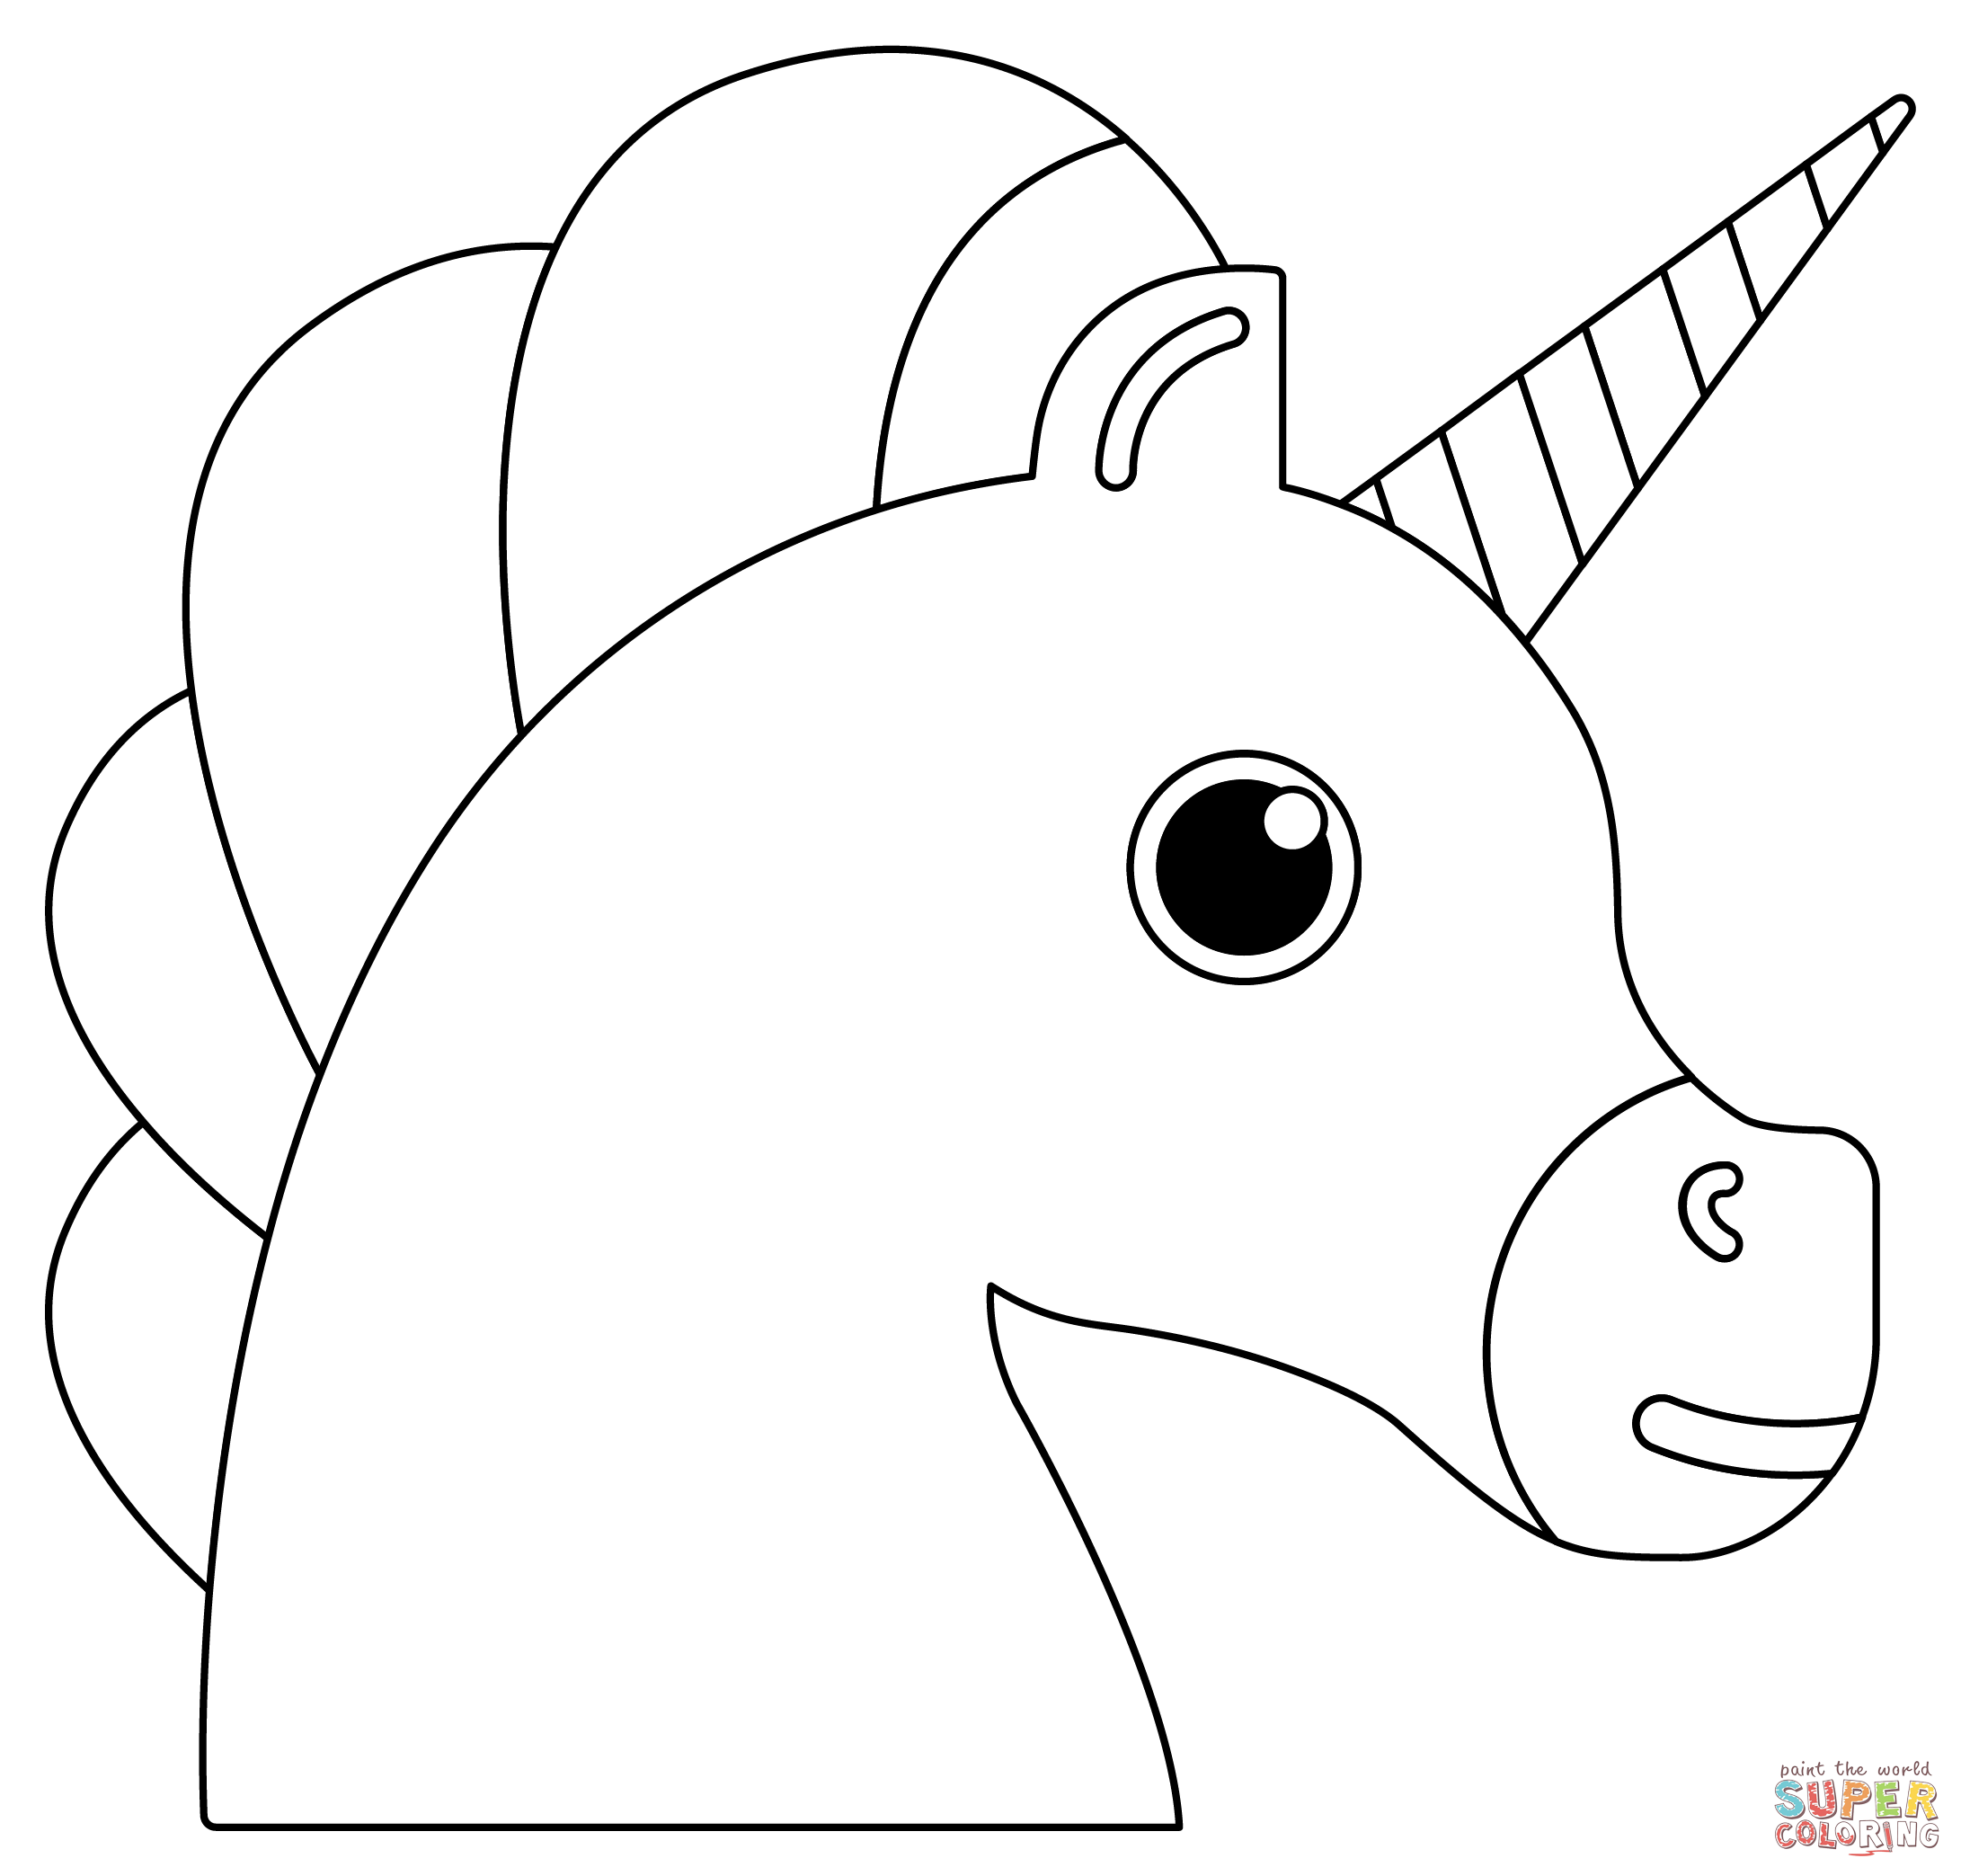 Unicorn head coloring page free printable coloring pages